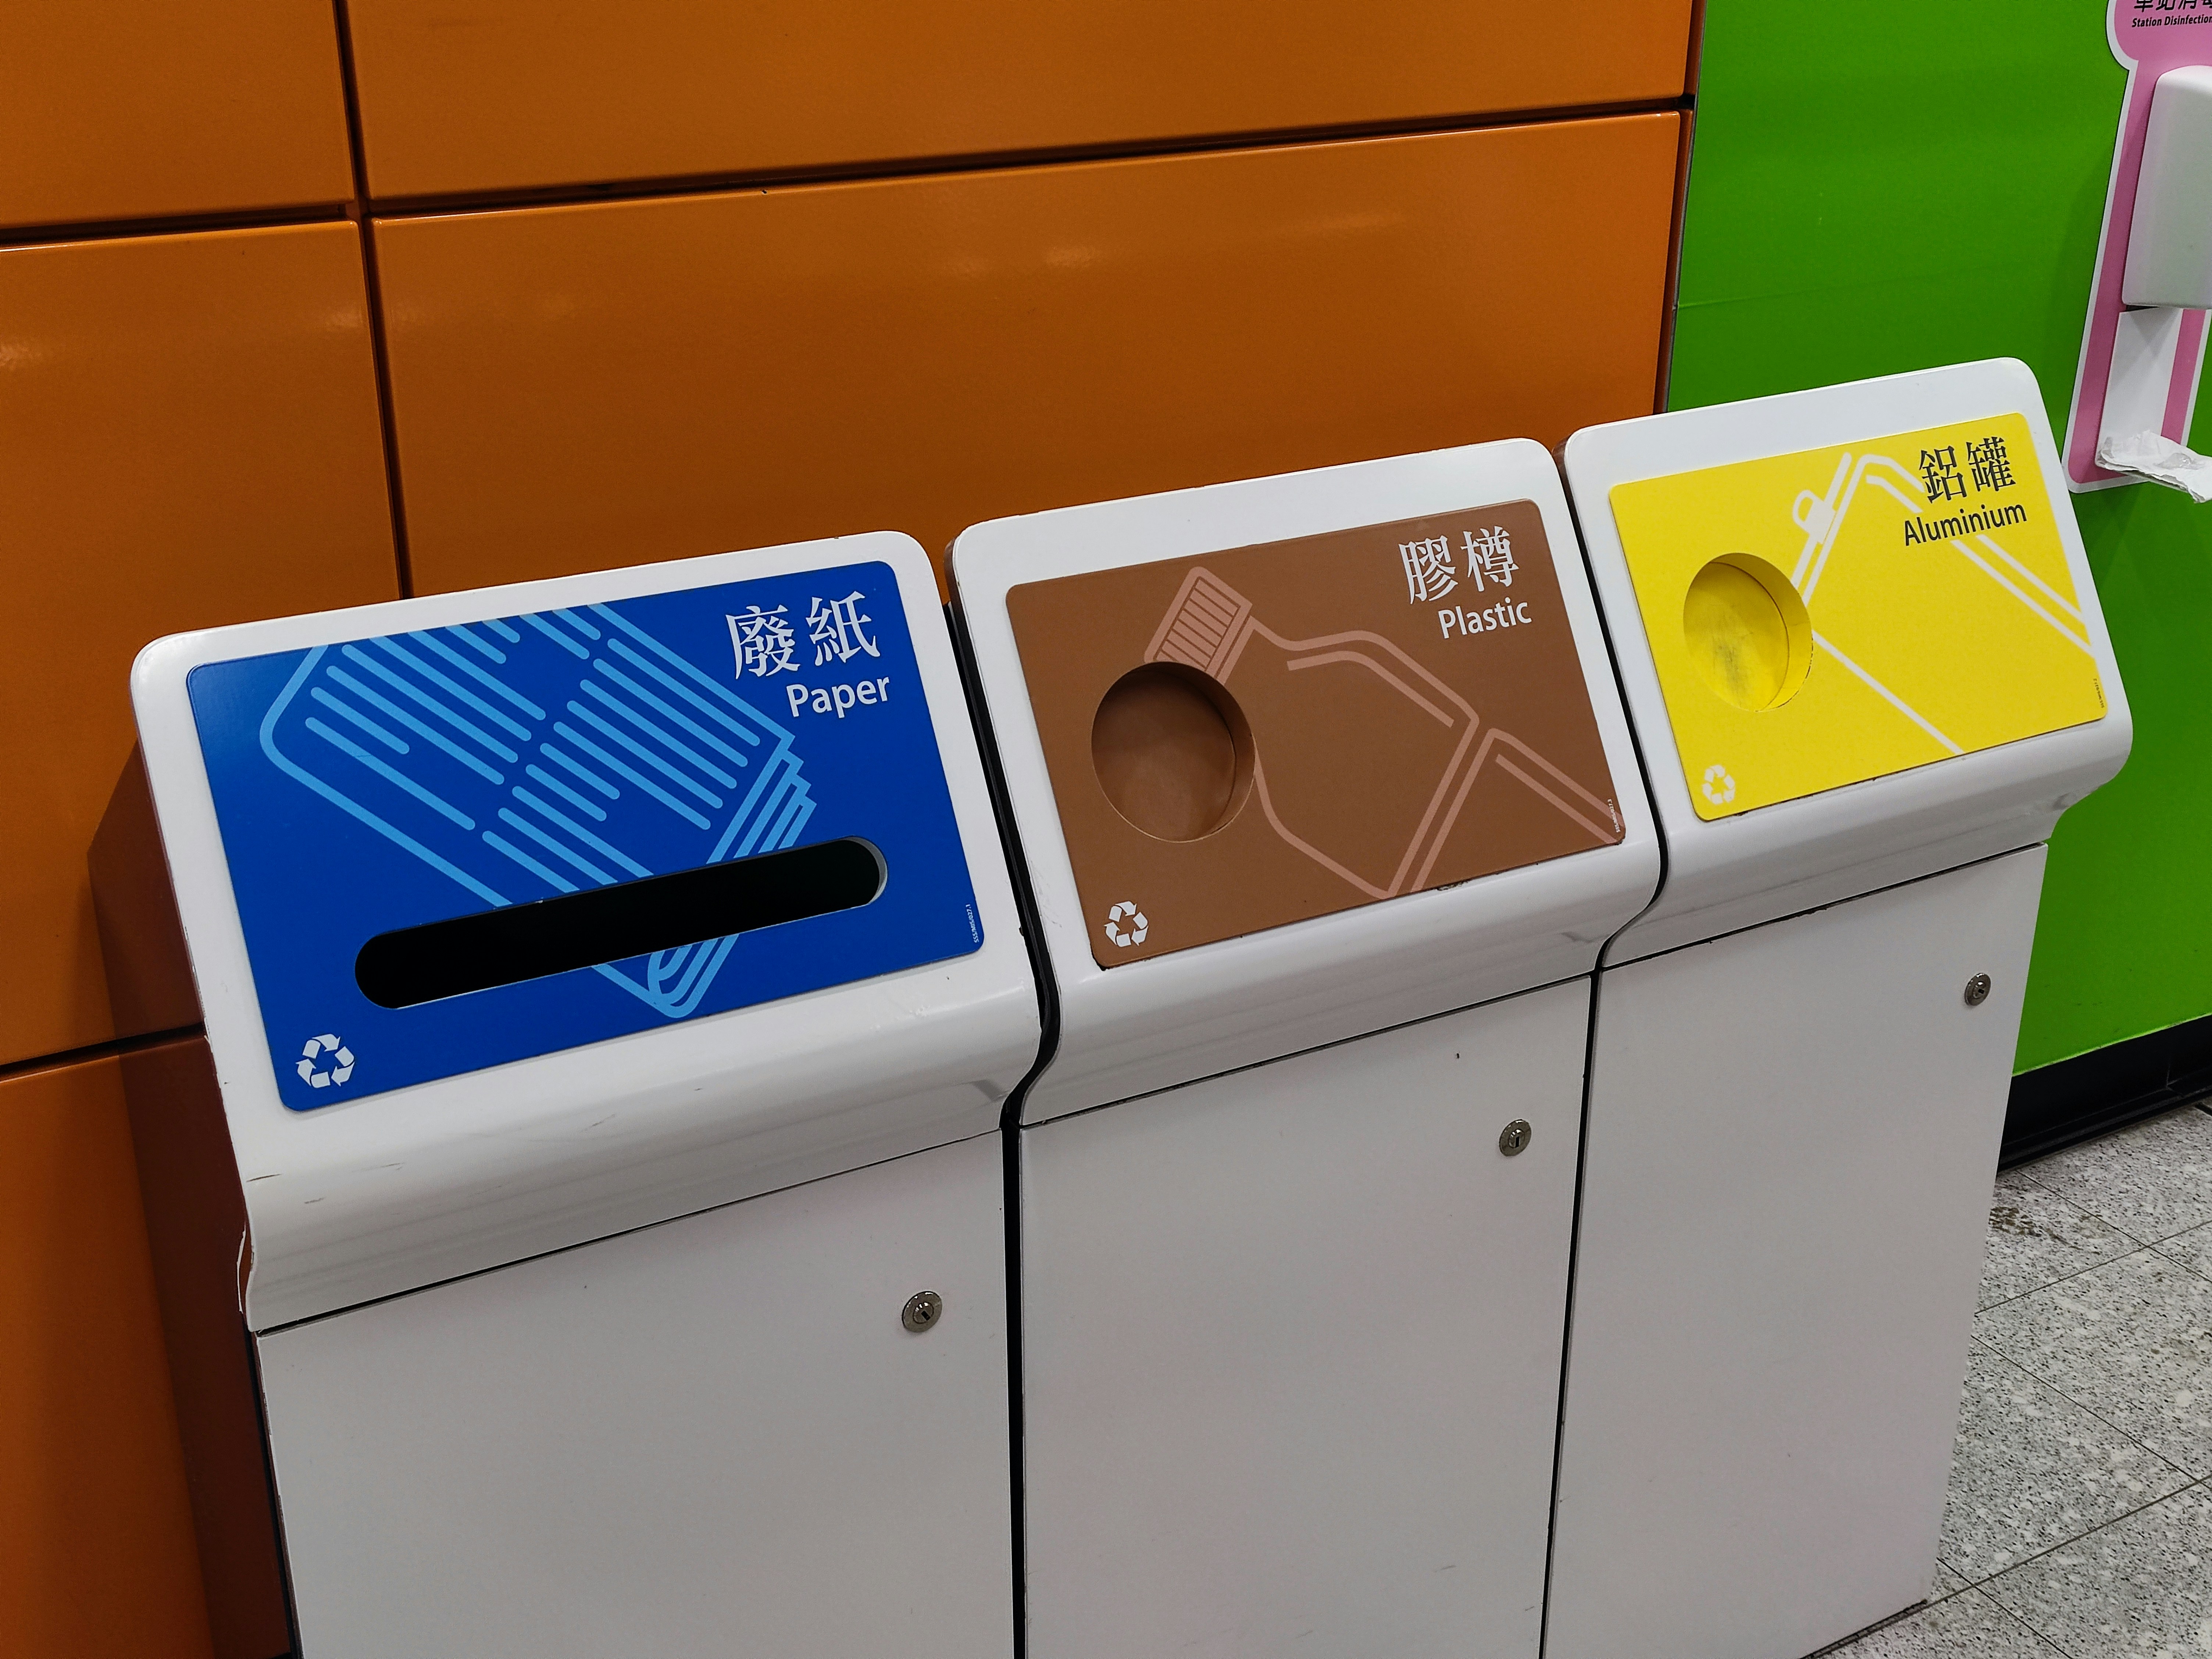 Recycling collection bins for waste paper, plastic and aluminium inside an MTR station (Underground) in Hong Kong.